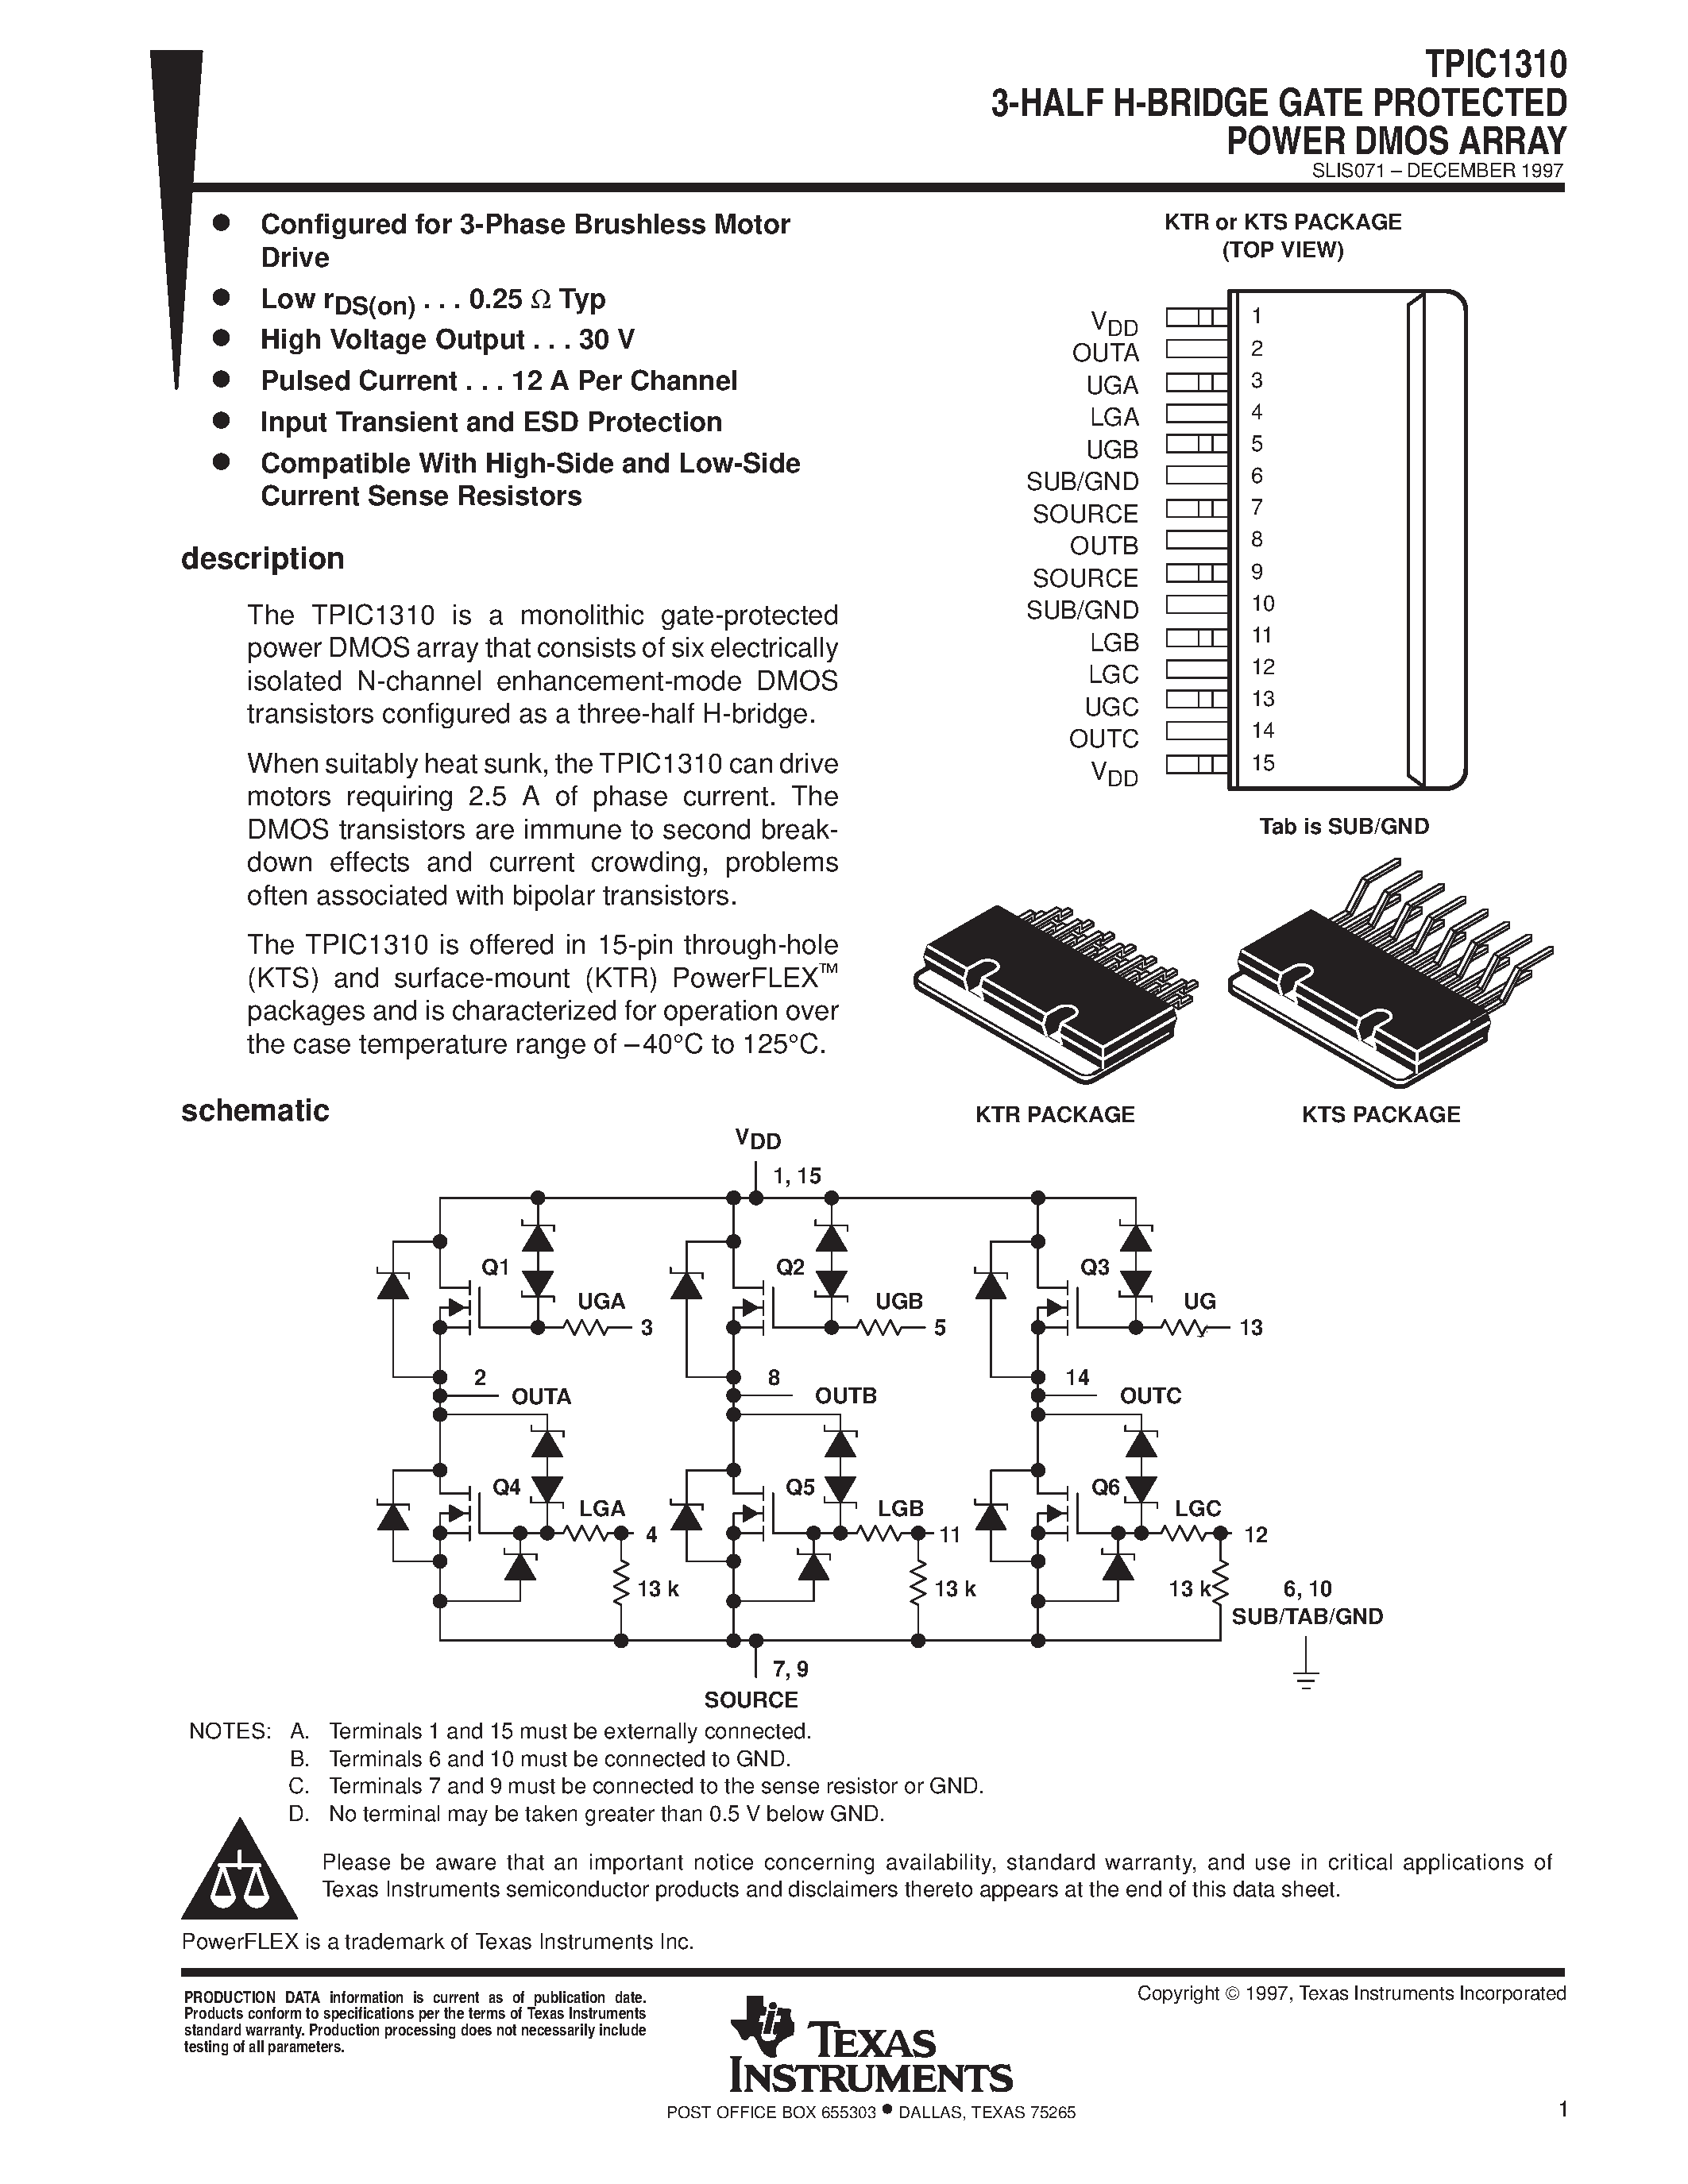 Datasheet TPIC1310 - 3-HALF H-BRIDGE GATE PROTECTED POWER DMOS ARRAY page 1